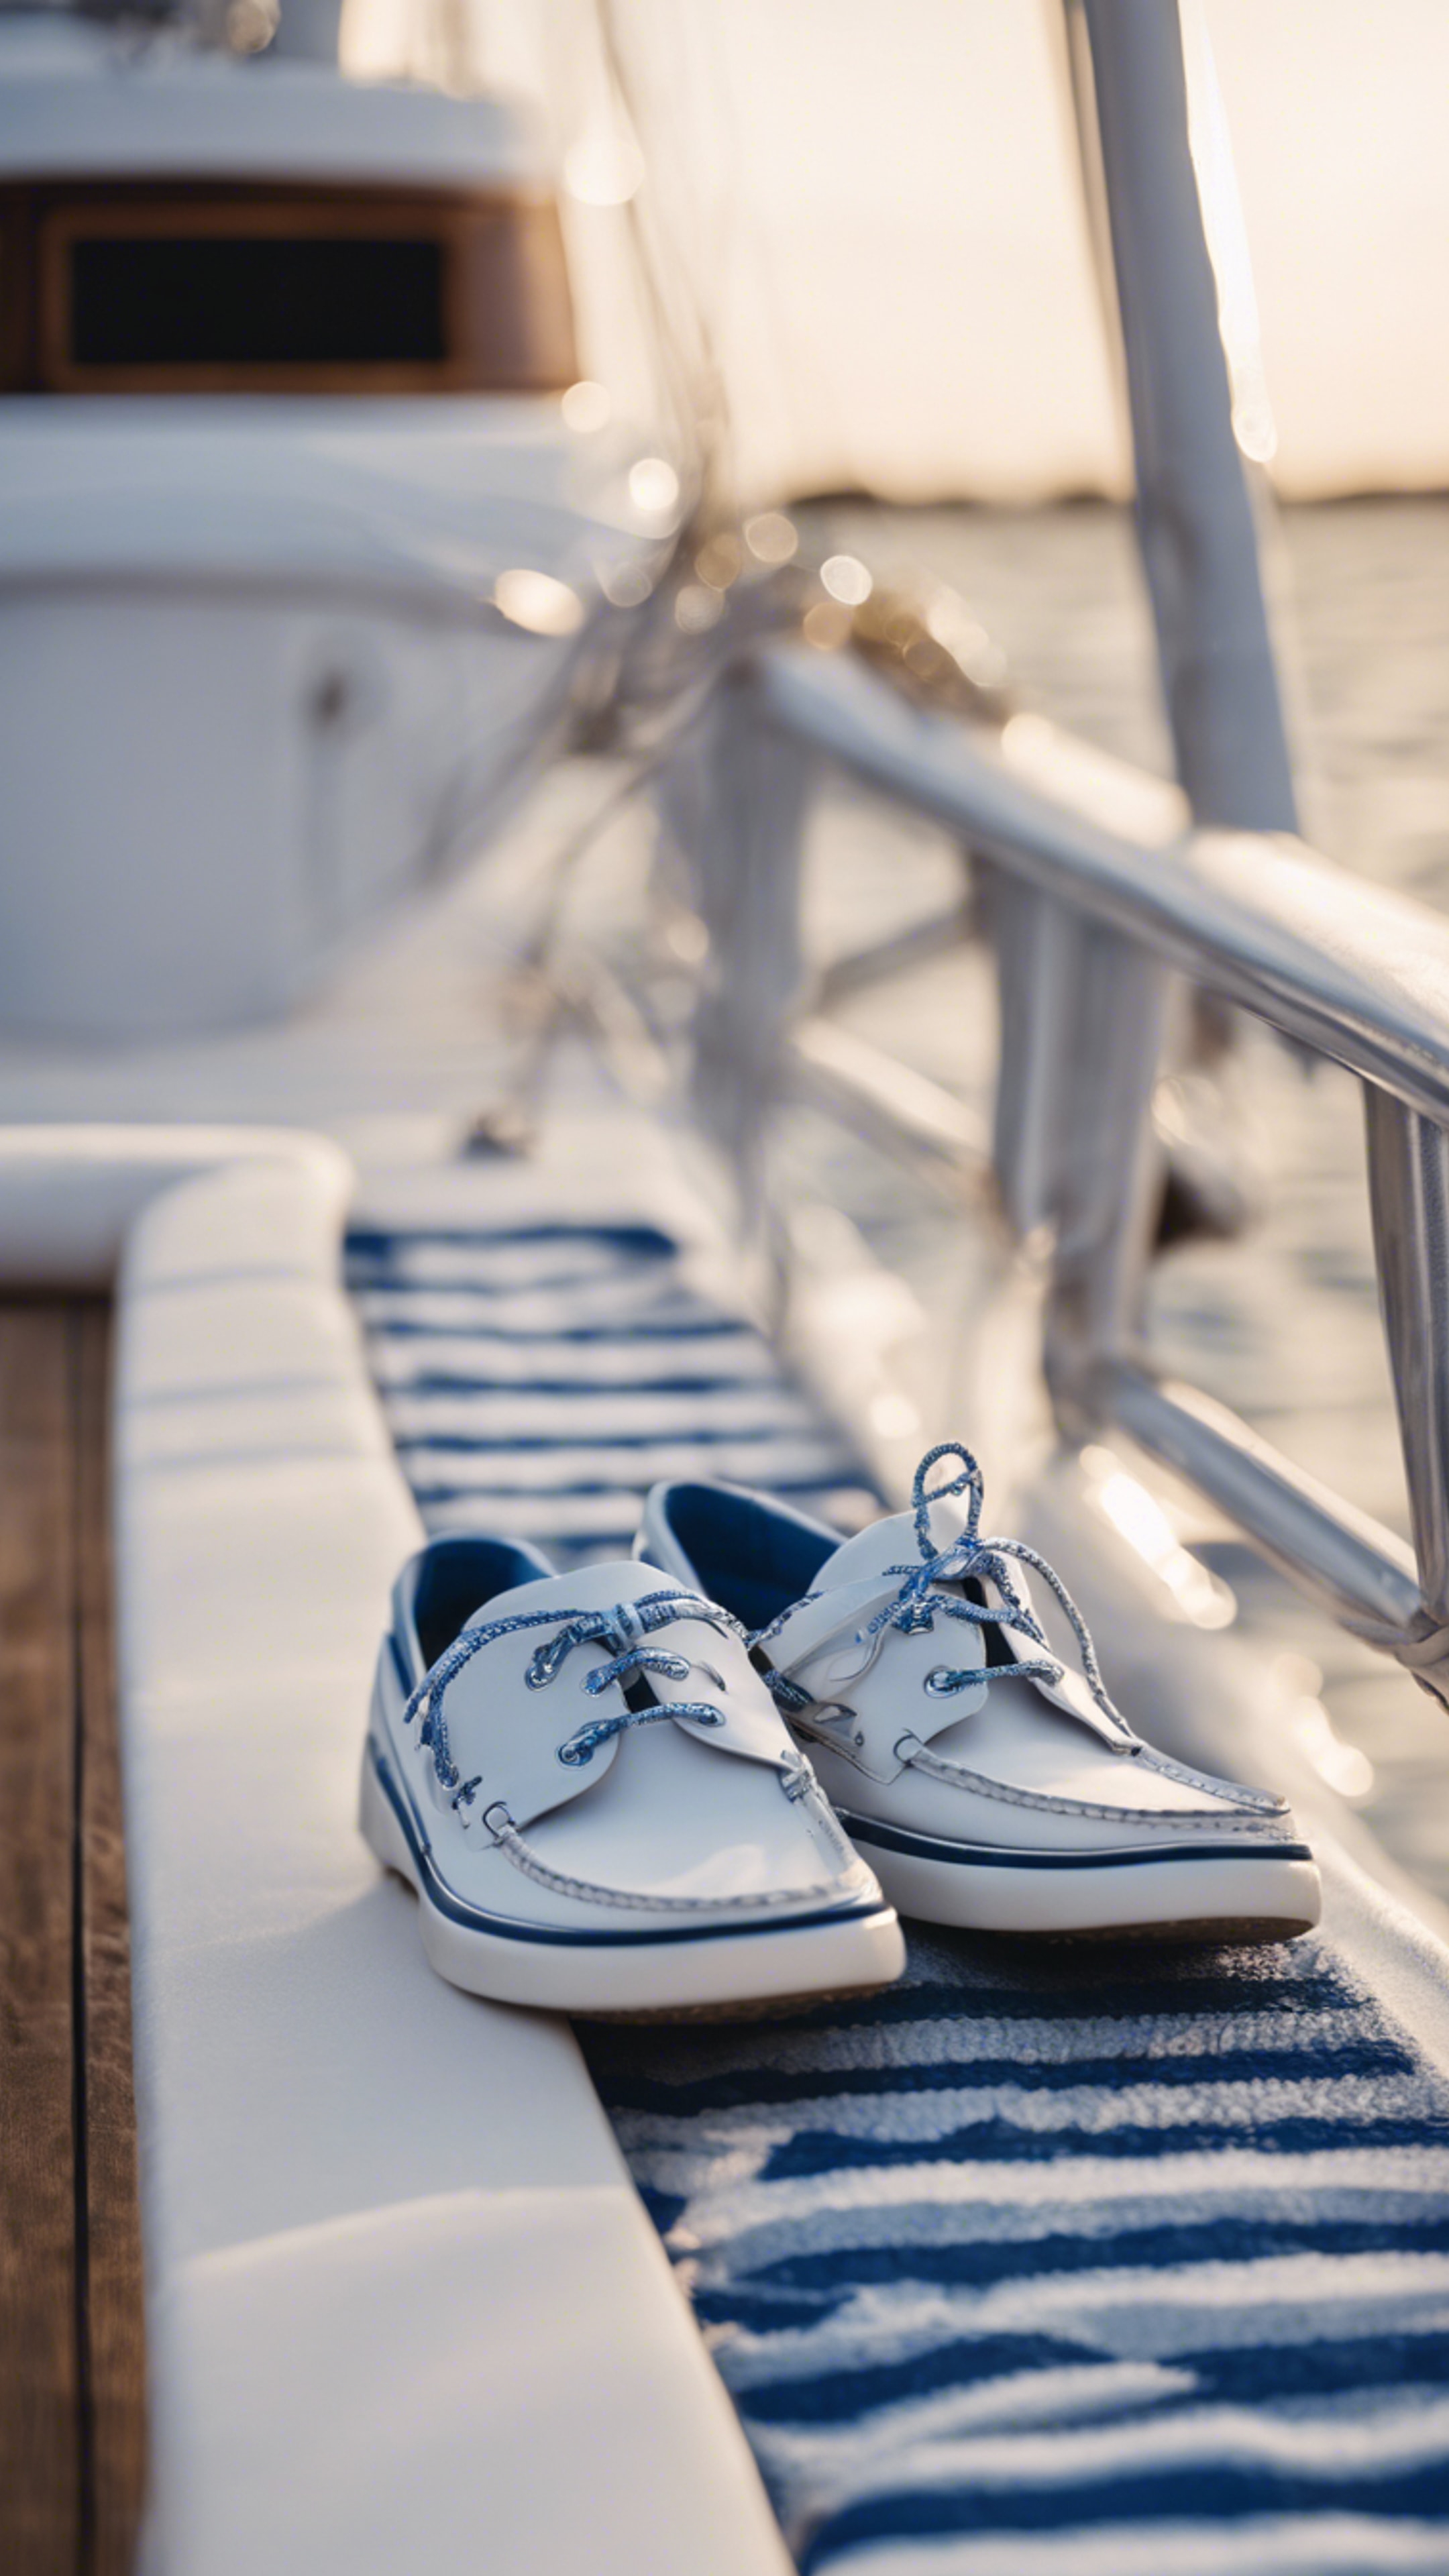 A pair of blue and white boat shoes resting on a yacht deck, reflecting preppy fashion. Hình nền[e5e4a620cbd541dd8bee]